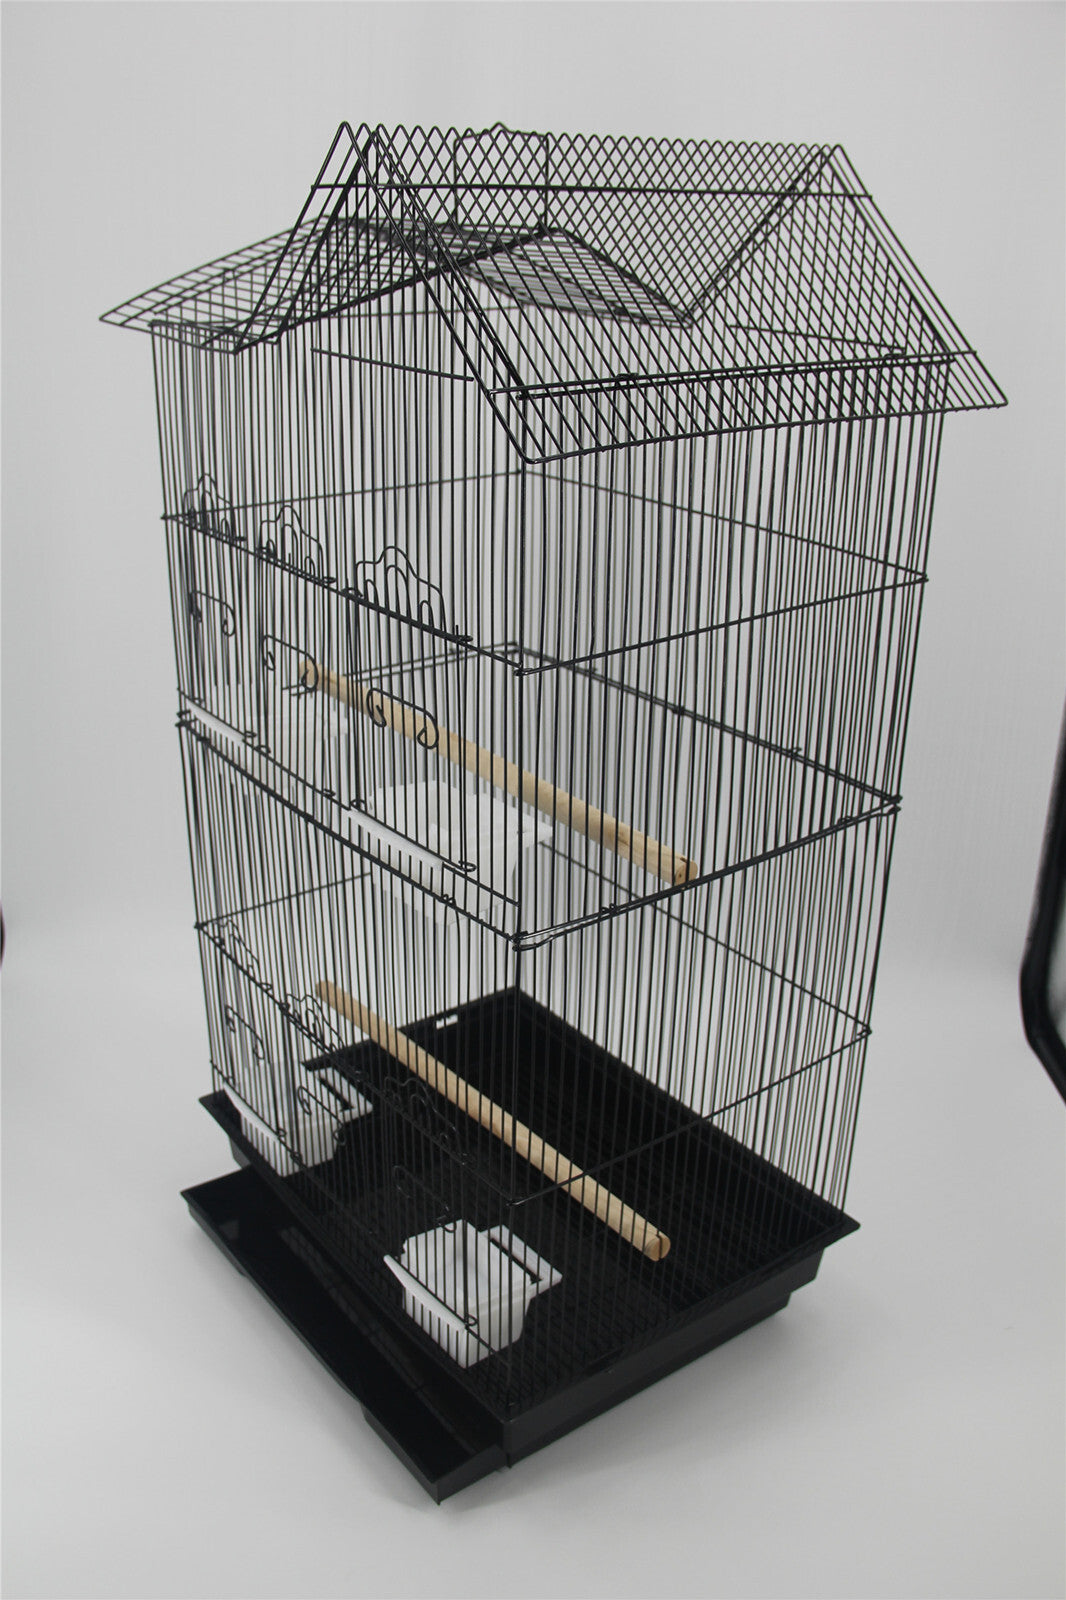 YES4PETS Medium Size Bird Cage Parrot Budgie Aviary with Perch - Black